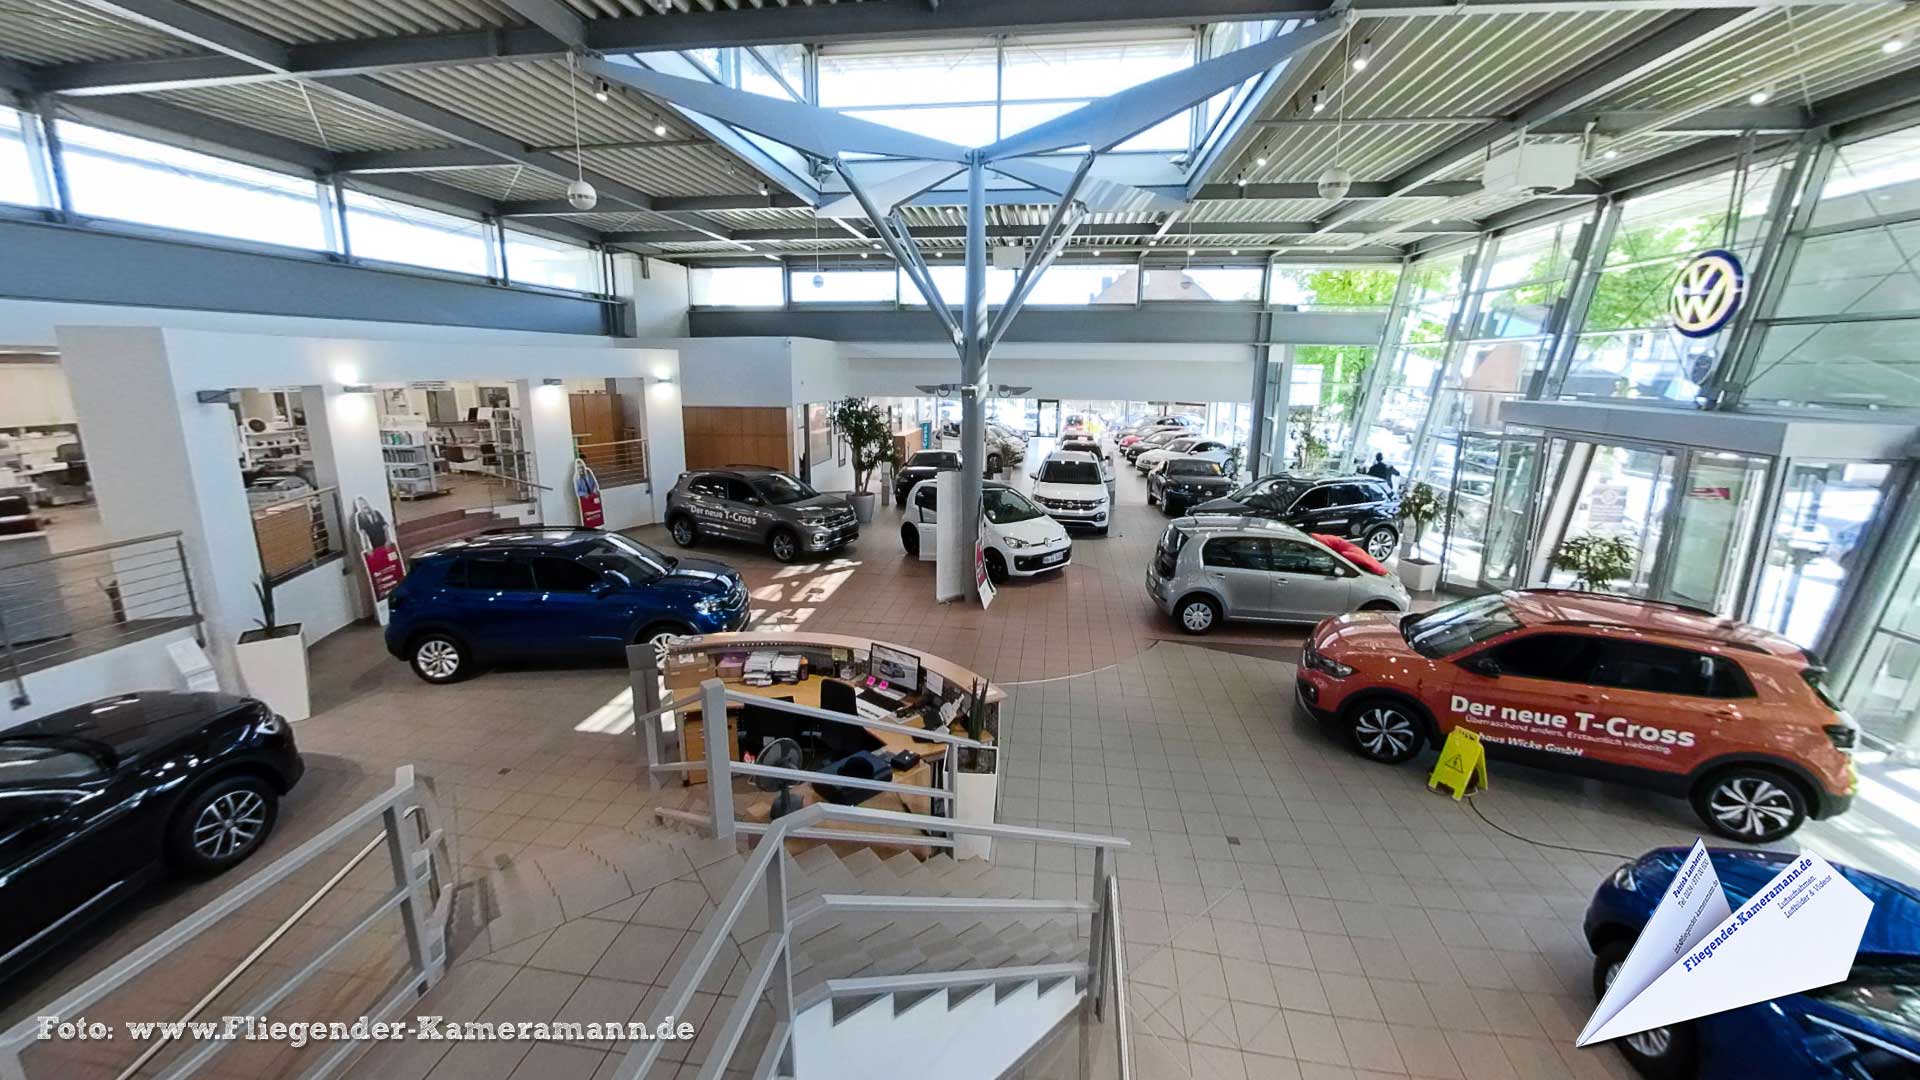 Autohaus Wicke in Bochum - 360°-Panorama